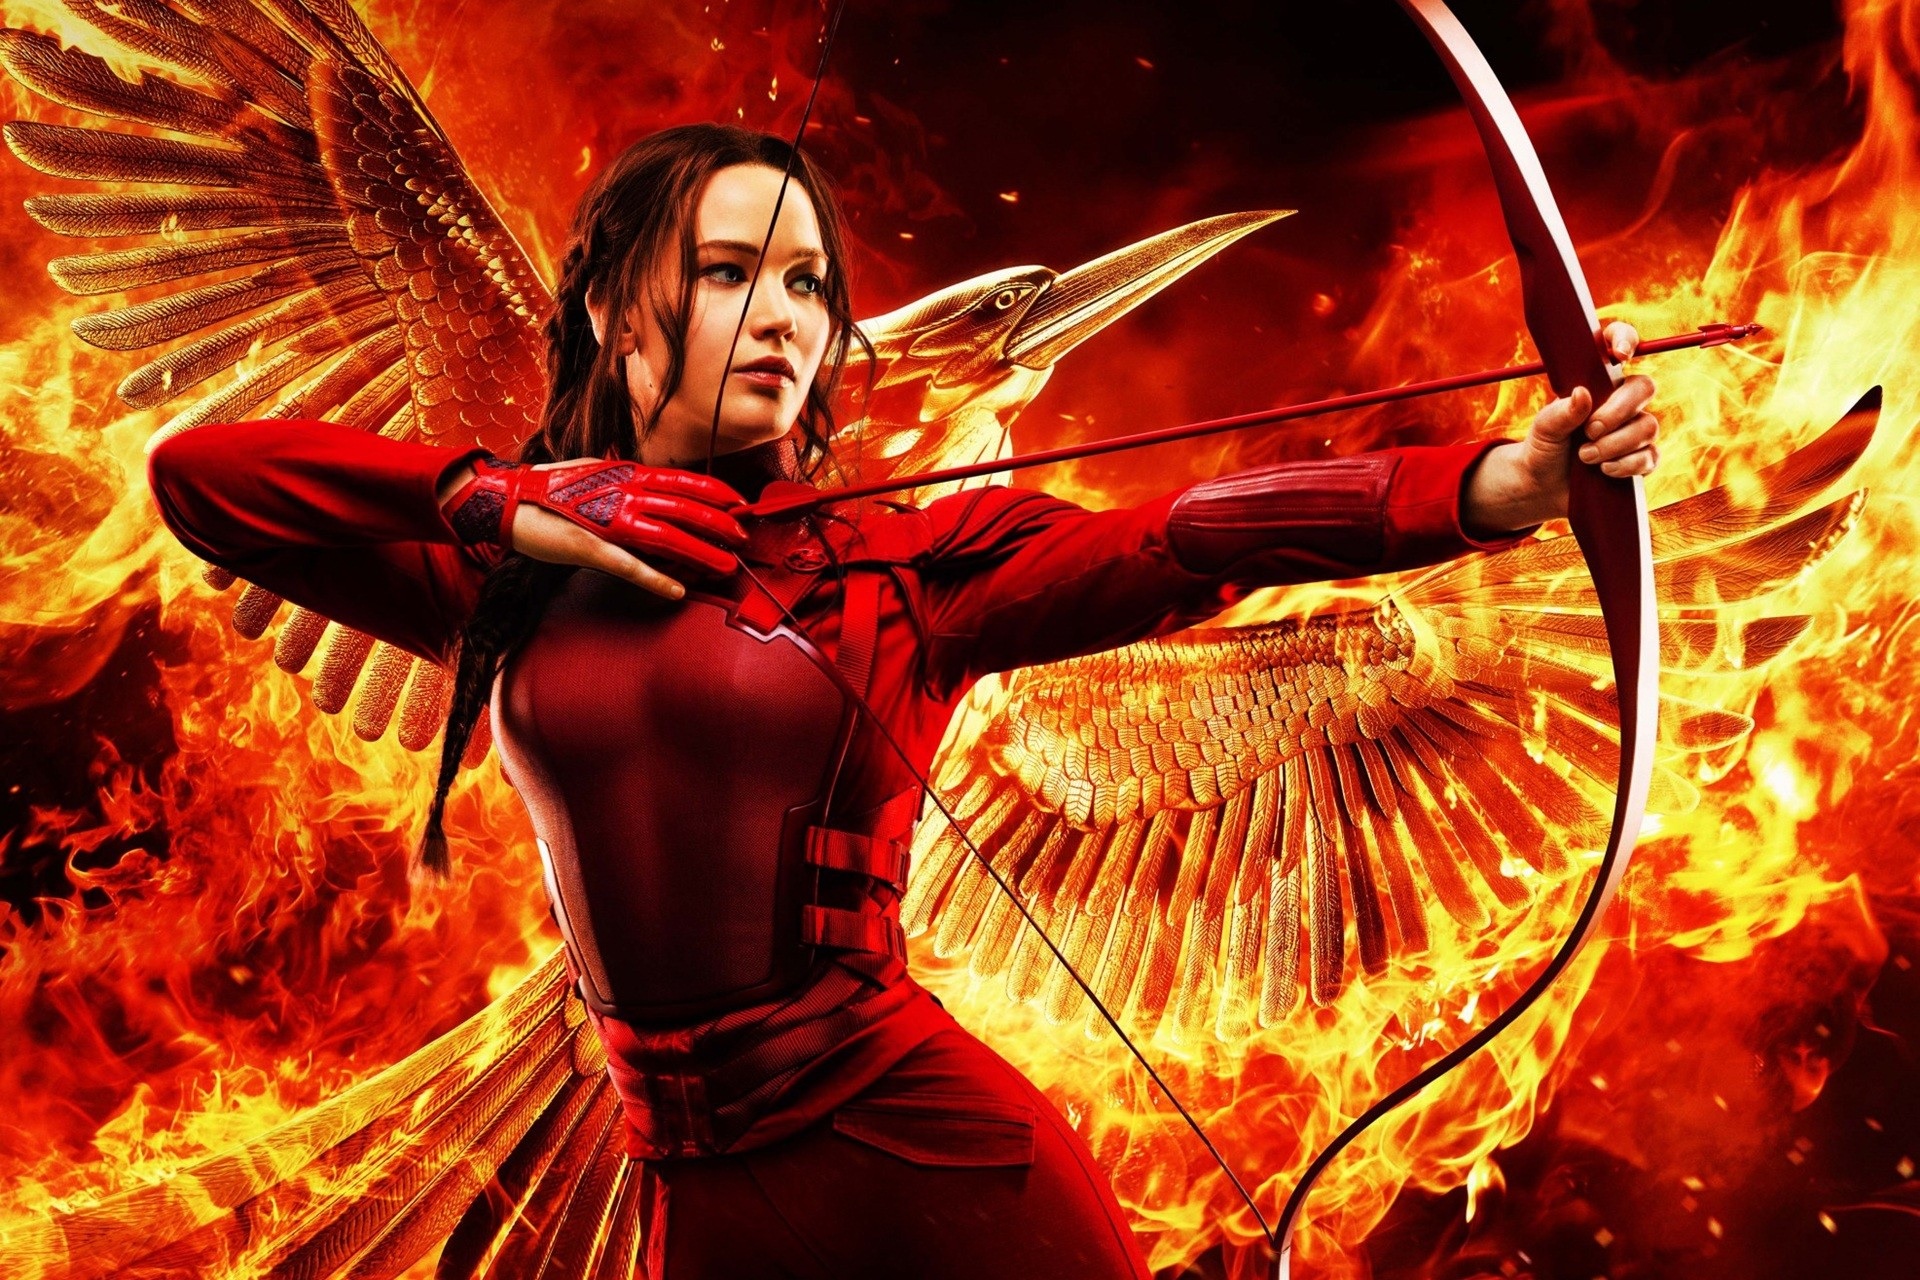 What Is Katniss Everdeen Fighting For? - The Odd Apple